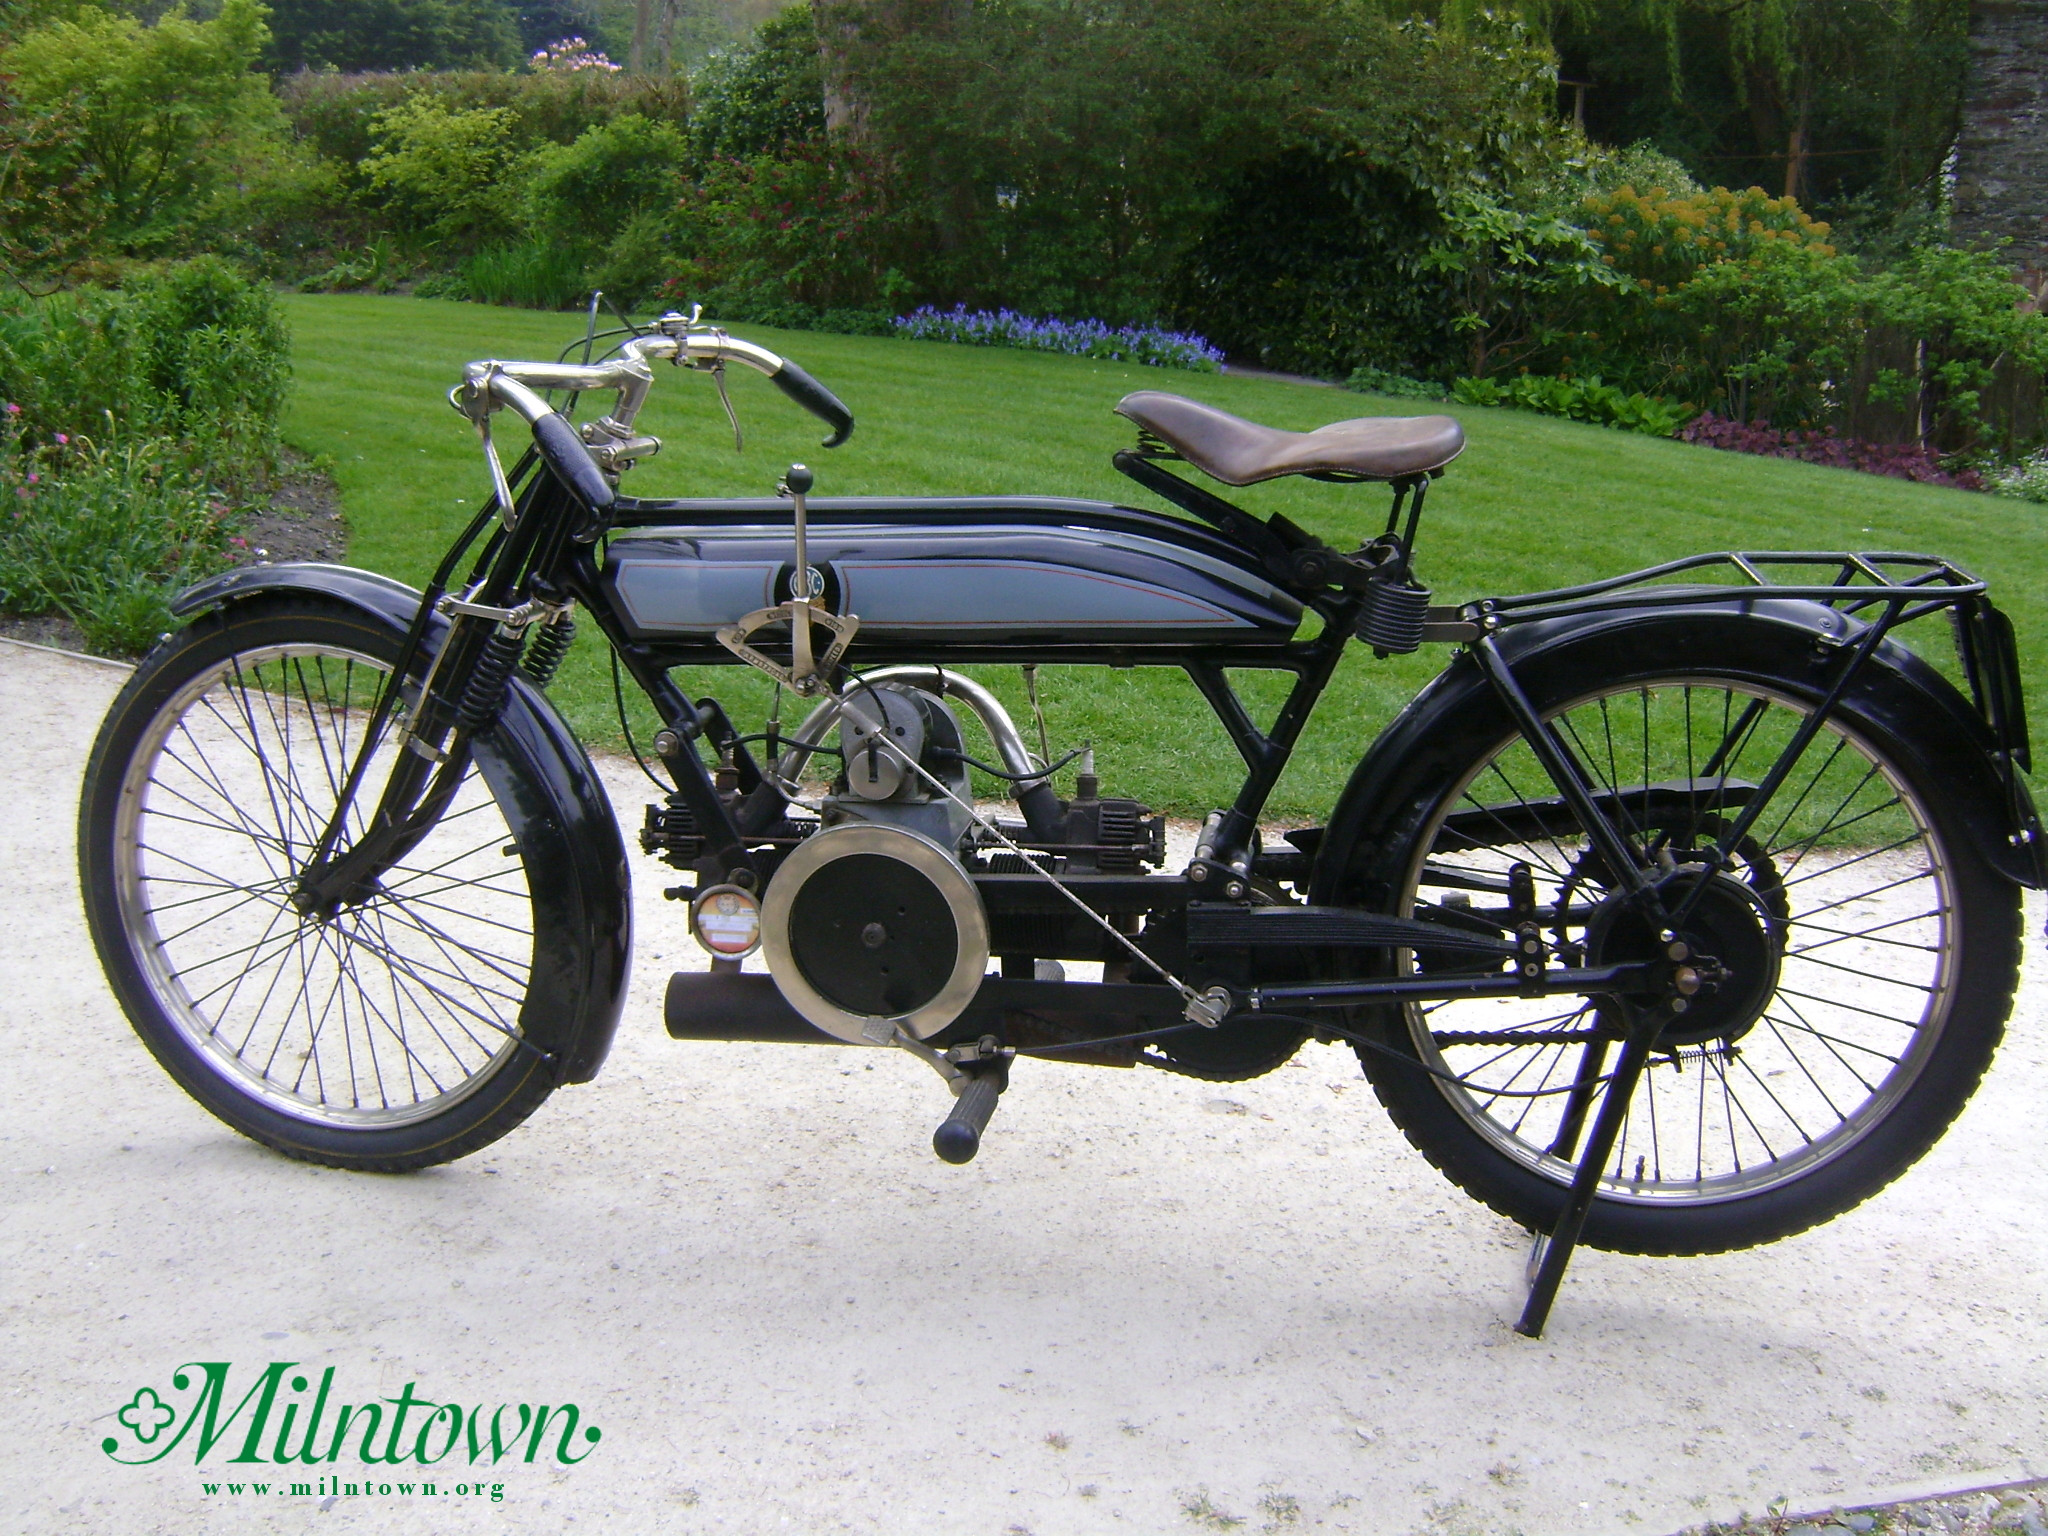 The ABC 500cc at Milntown Trust